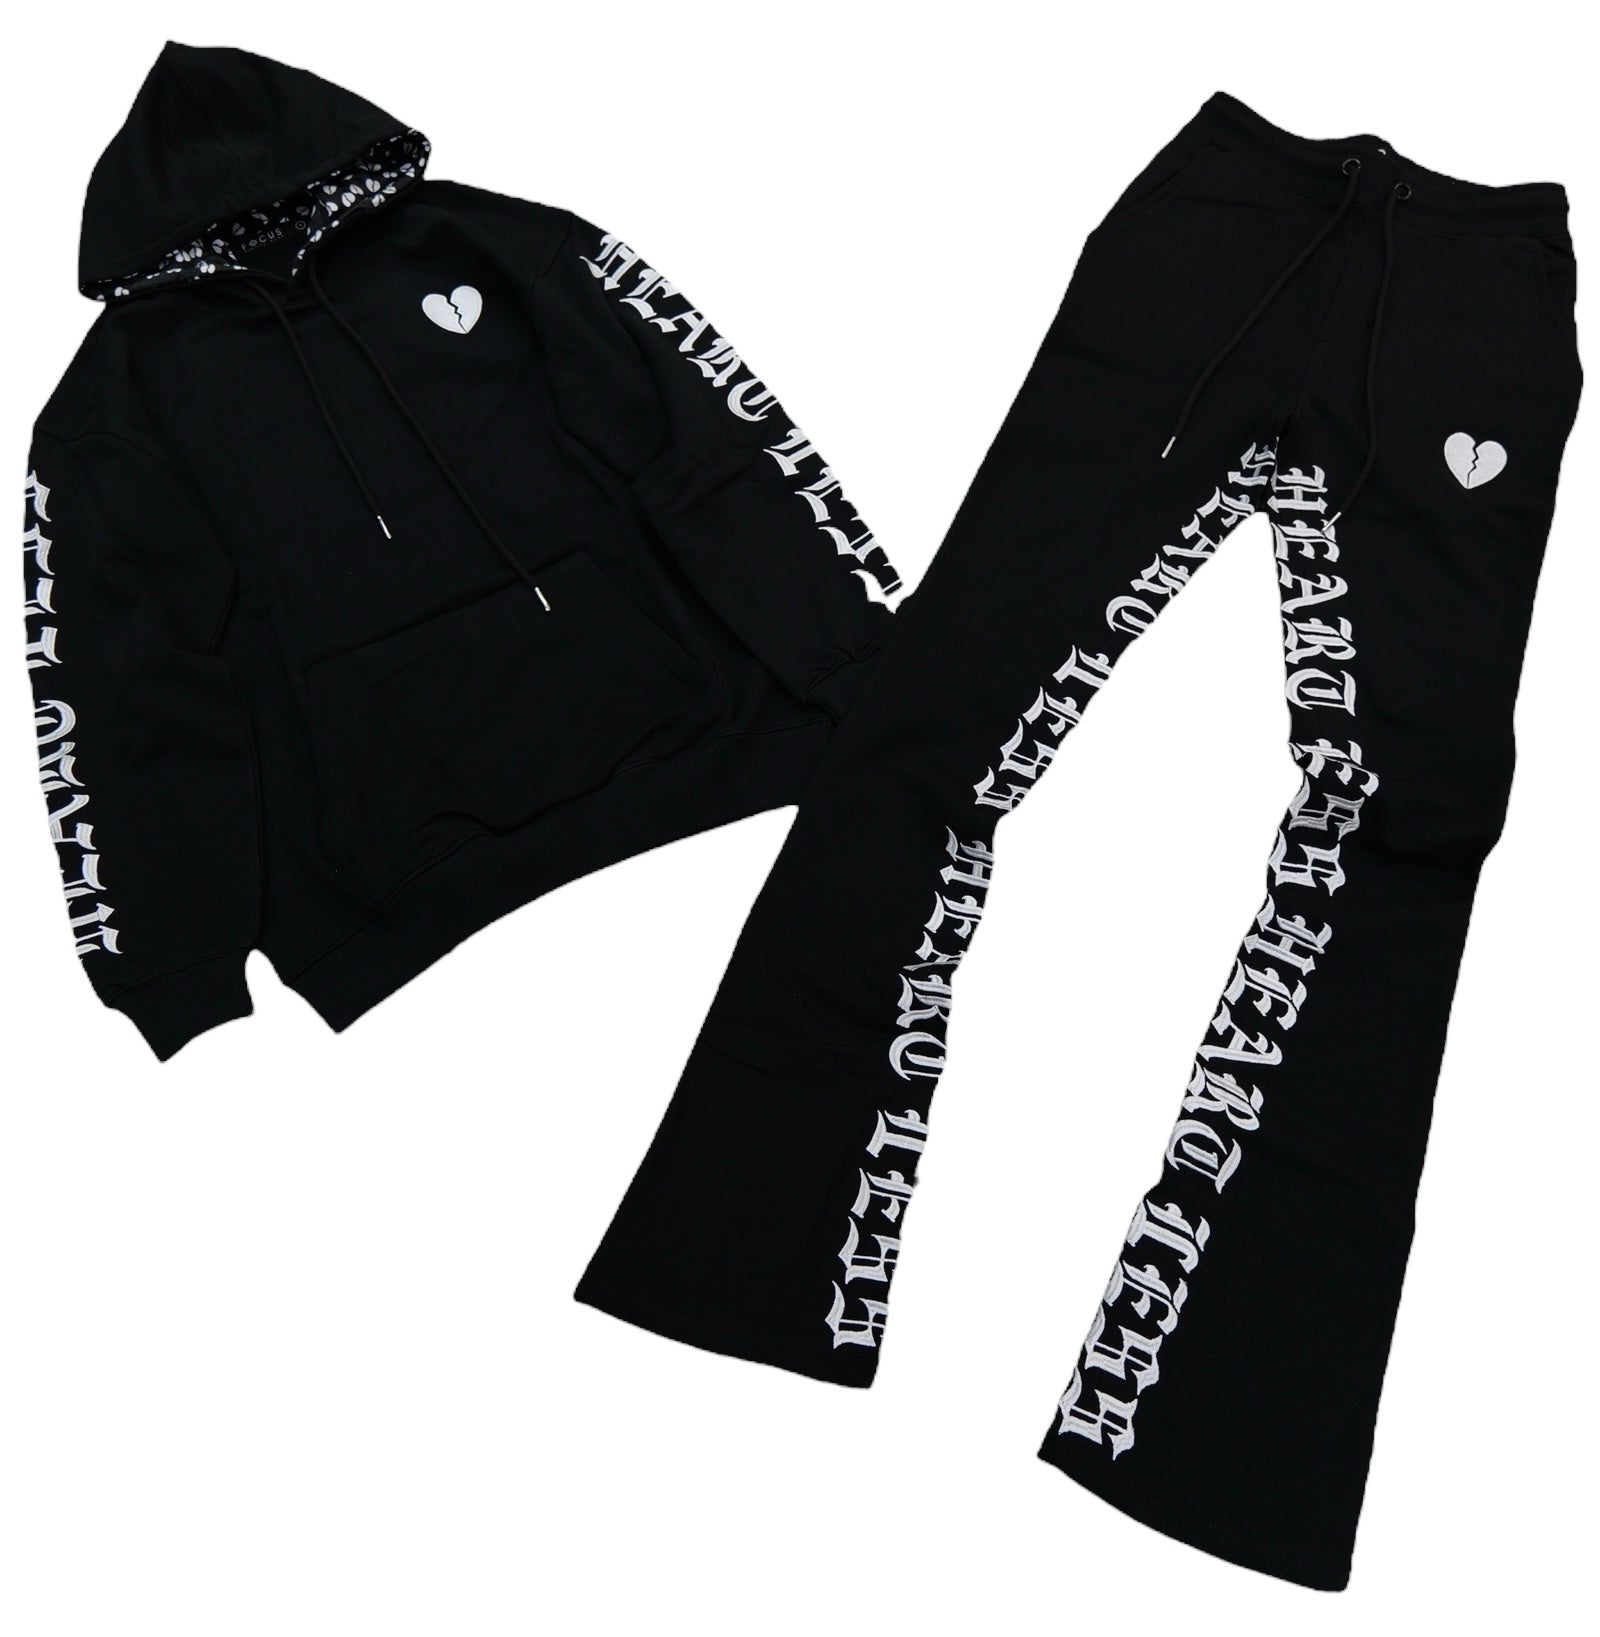 Focus Heartless Stacked Sweatsuit (Black)